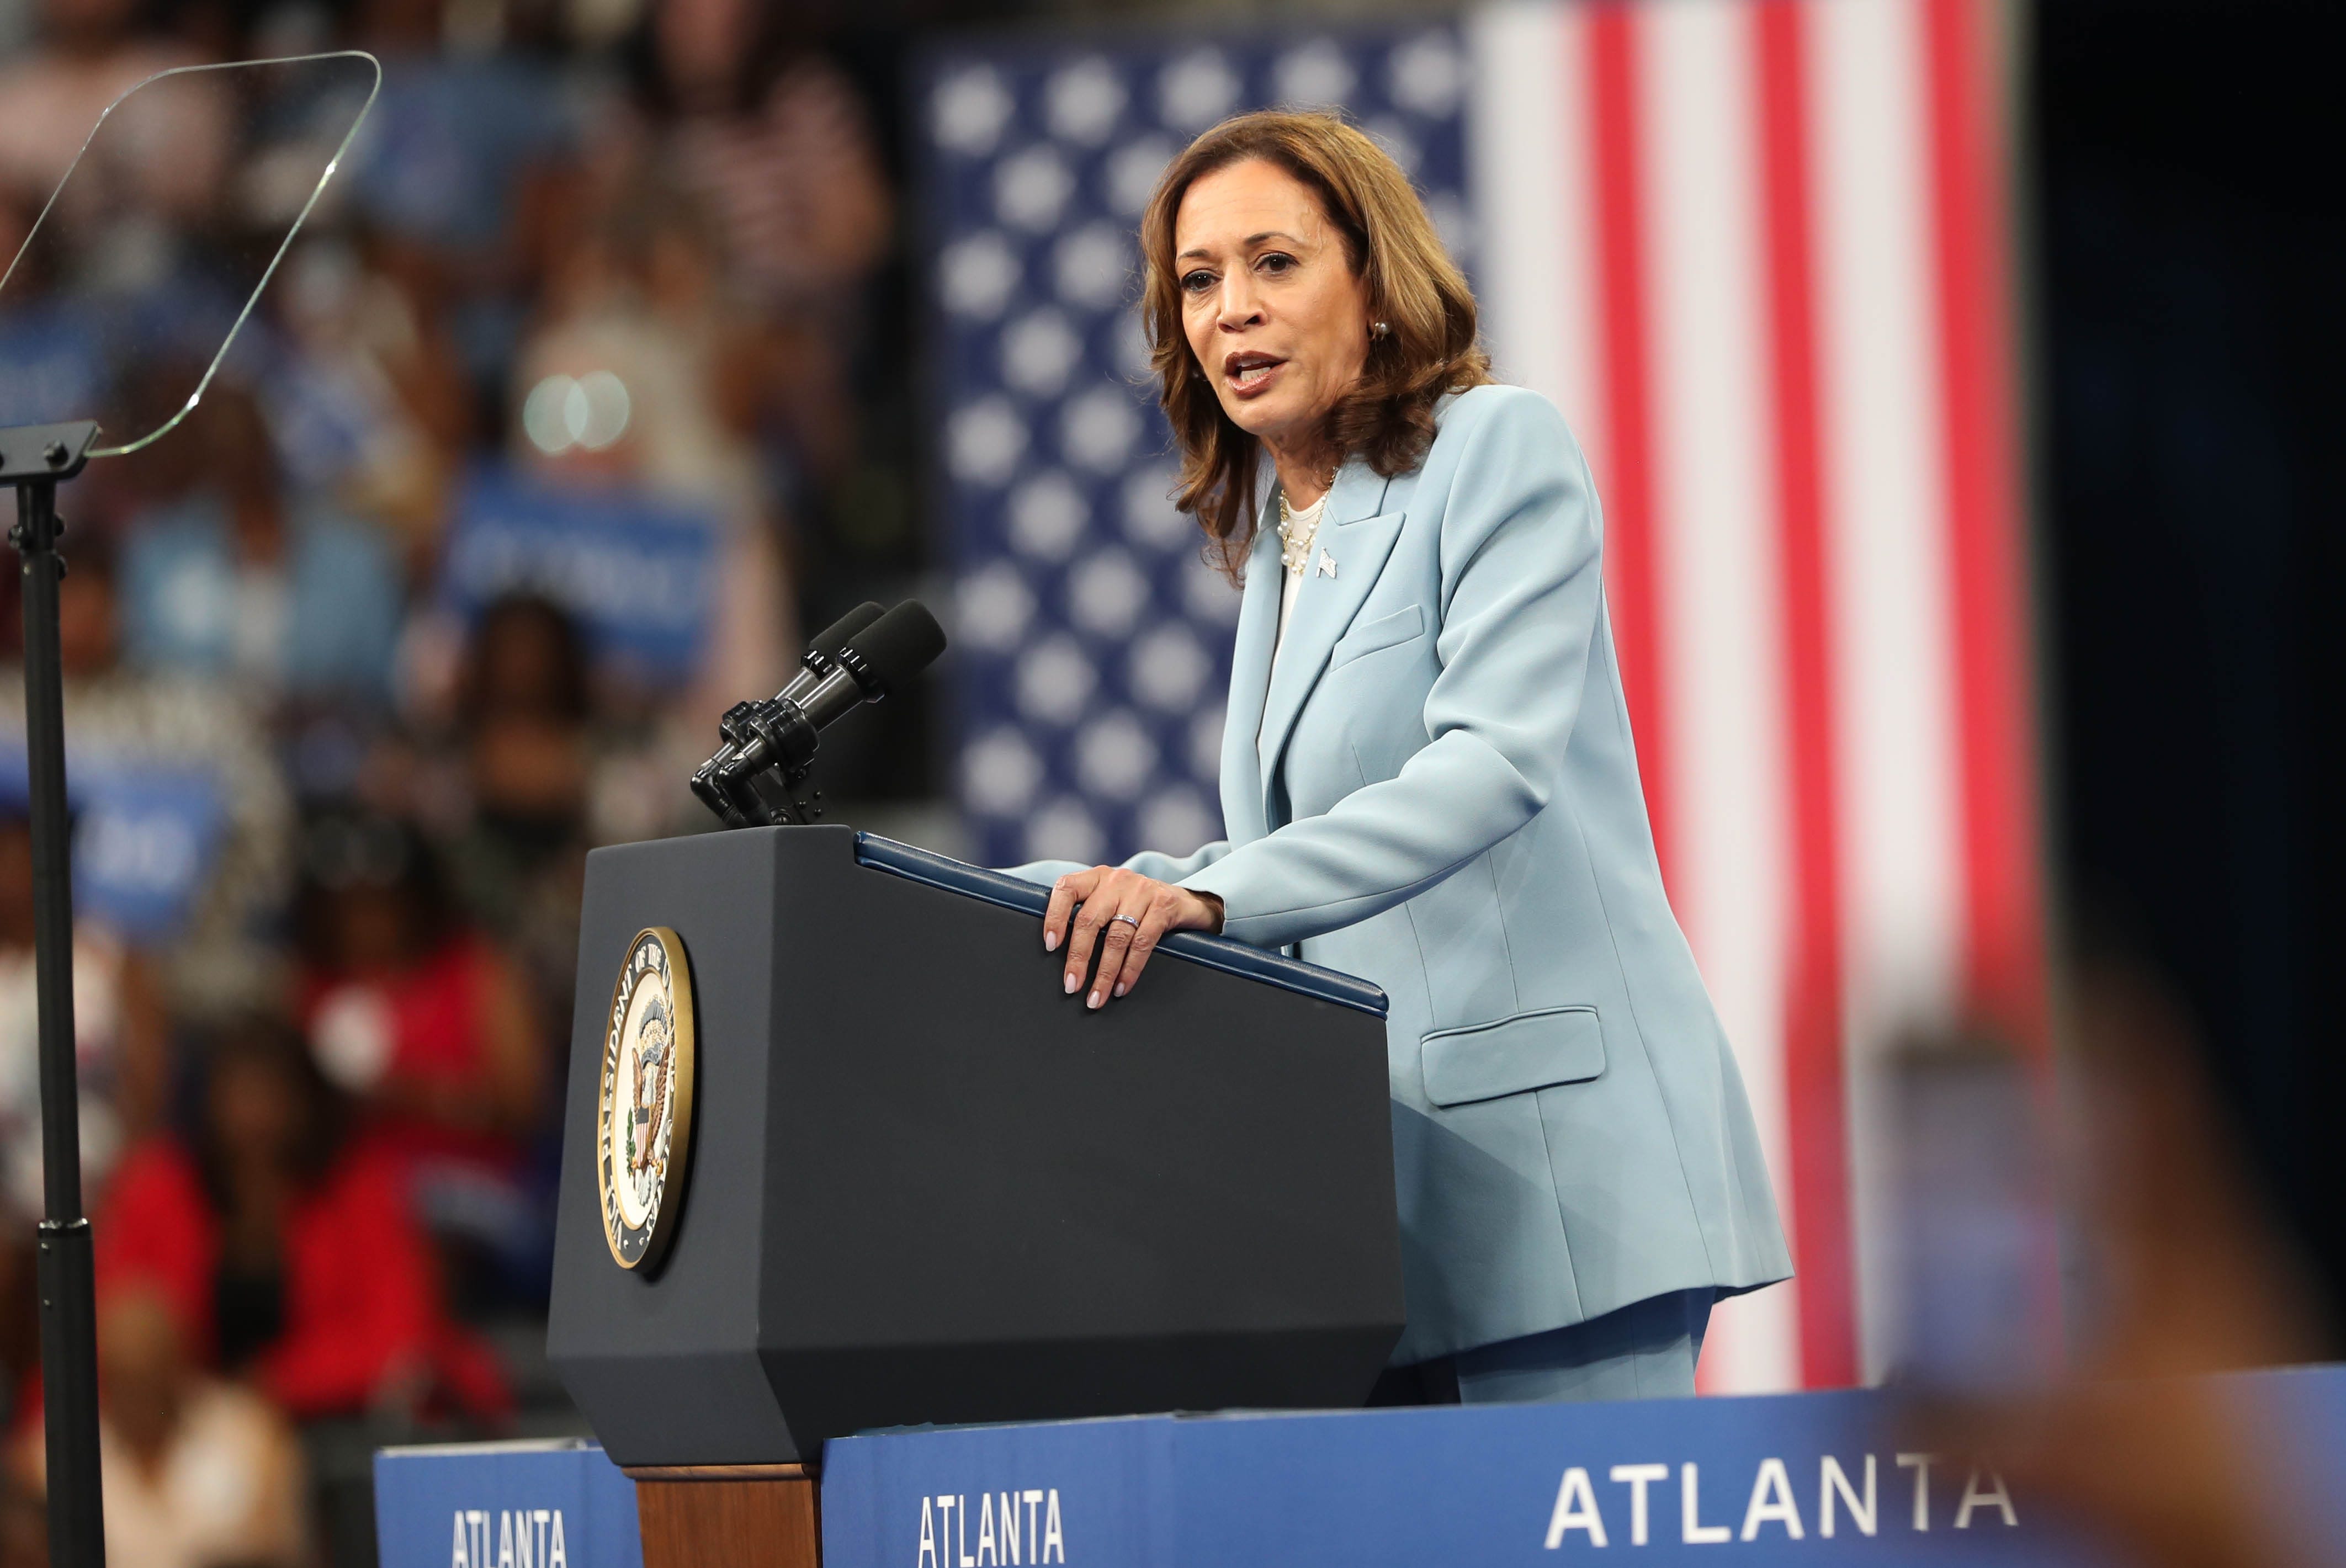 VP Kamala Harris to make stop in Savannah with soon-to-be named running mate